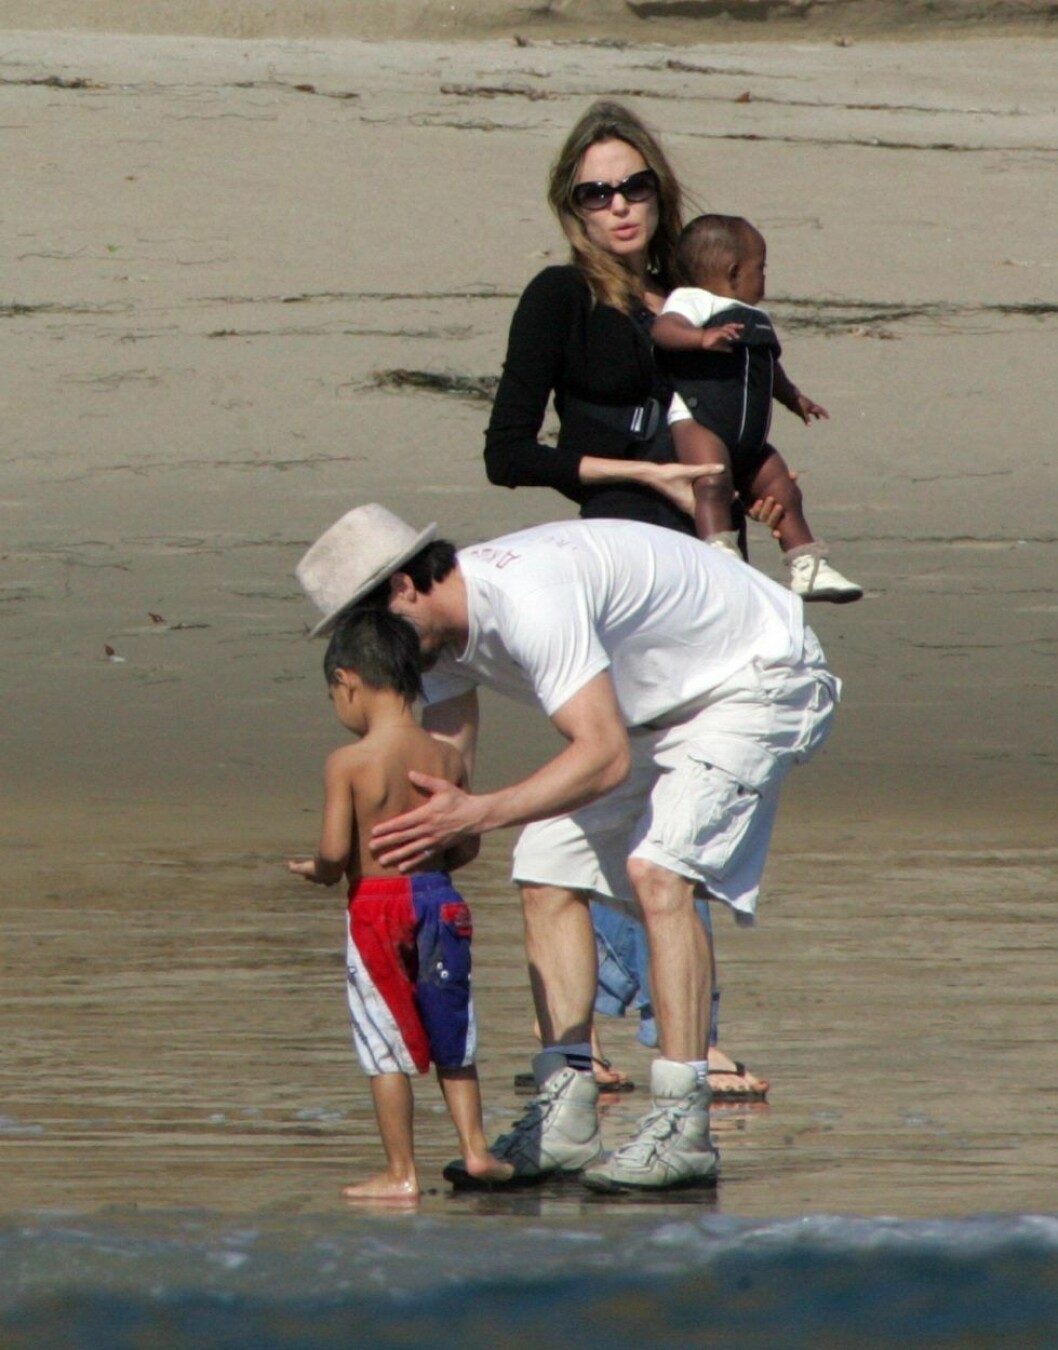 Brad Pitt and Angelina Jolie spend a family day at the beach